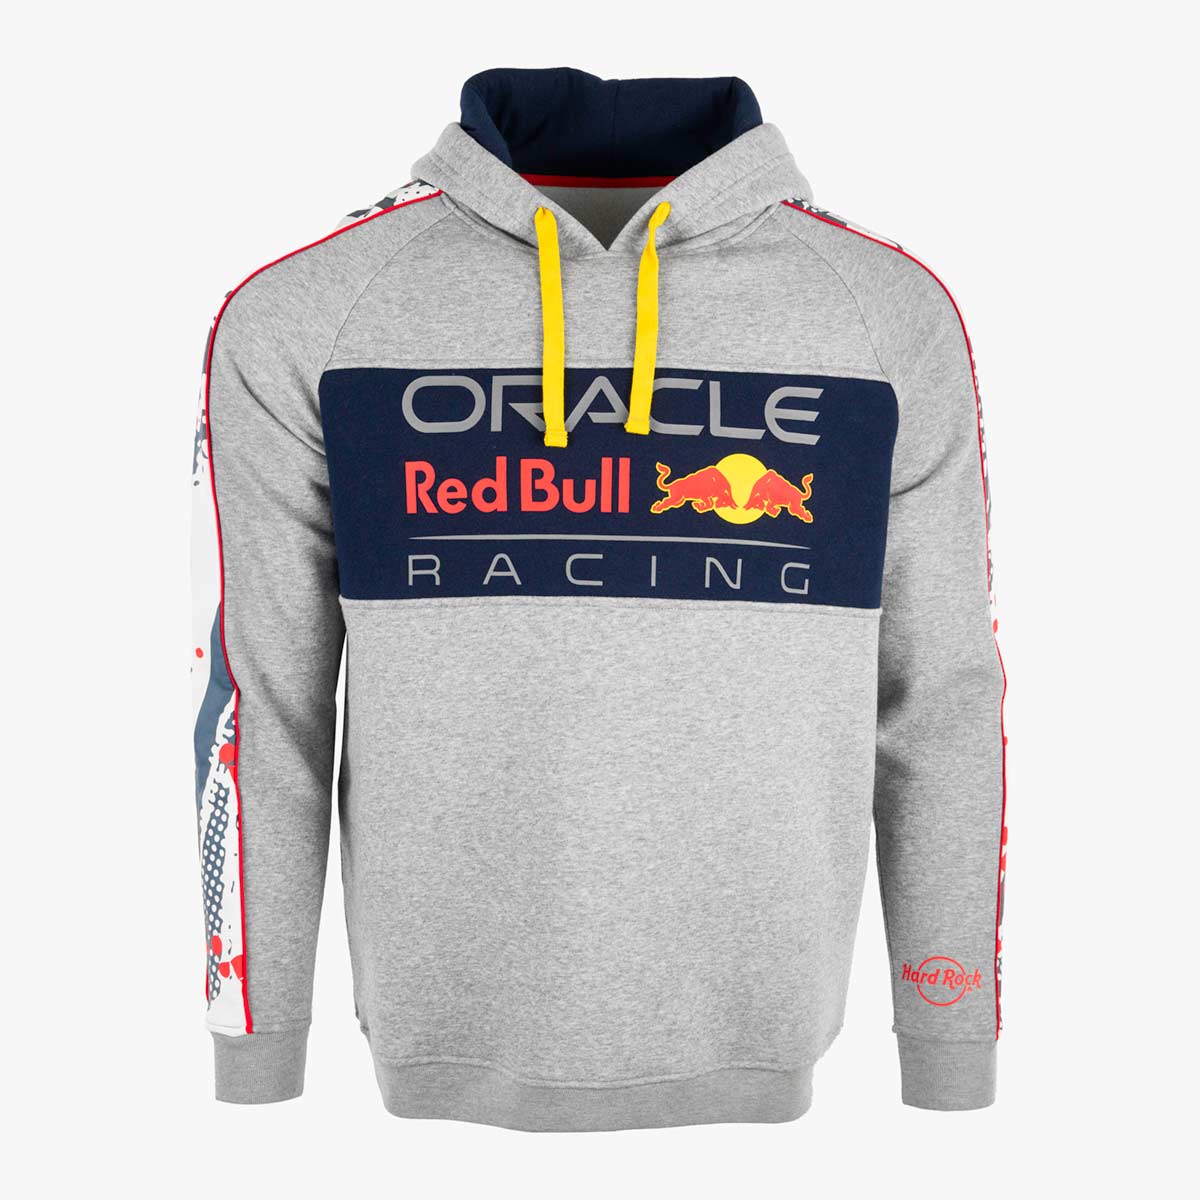 Oracle Red Bull Double Layer Hoodie in Grey with Sleeve Print Piping Details image number 1